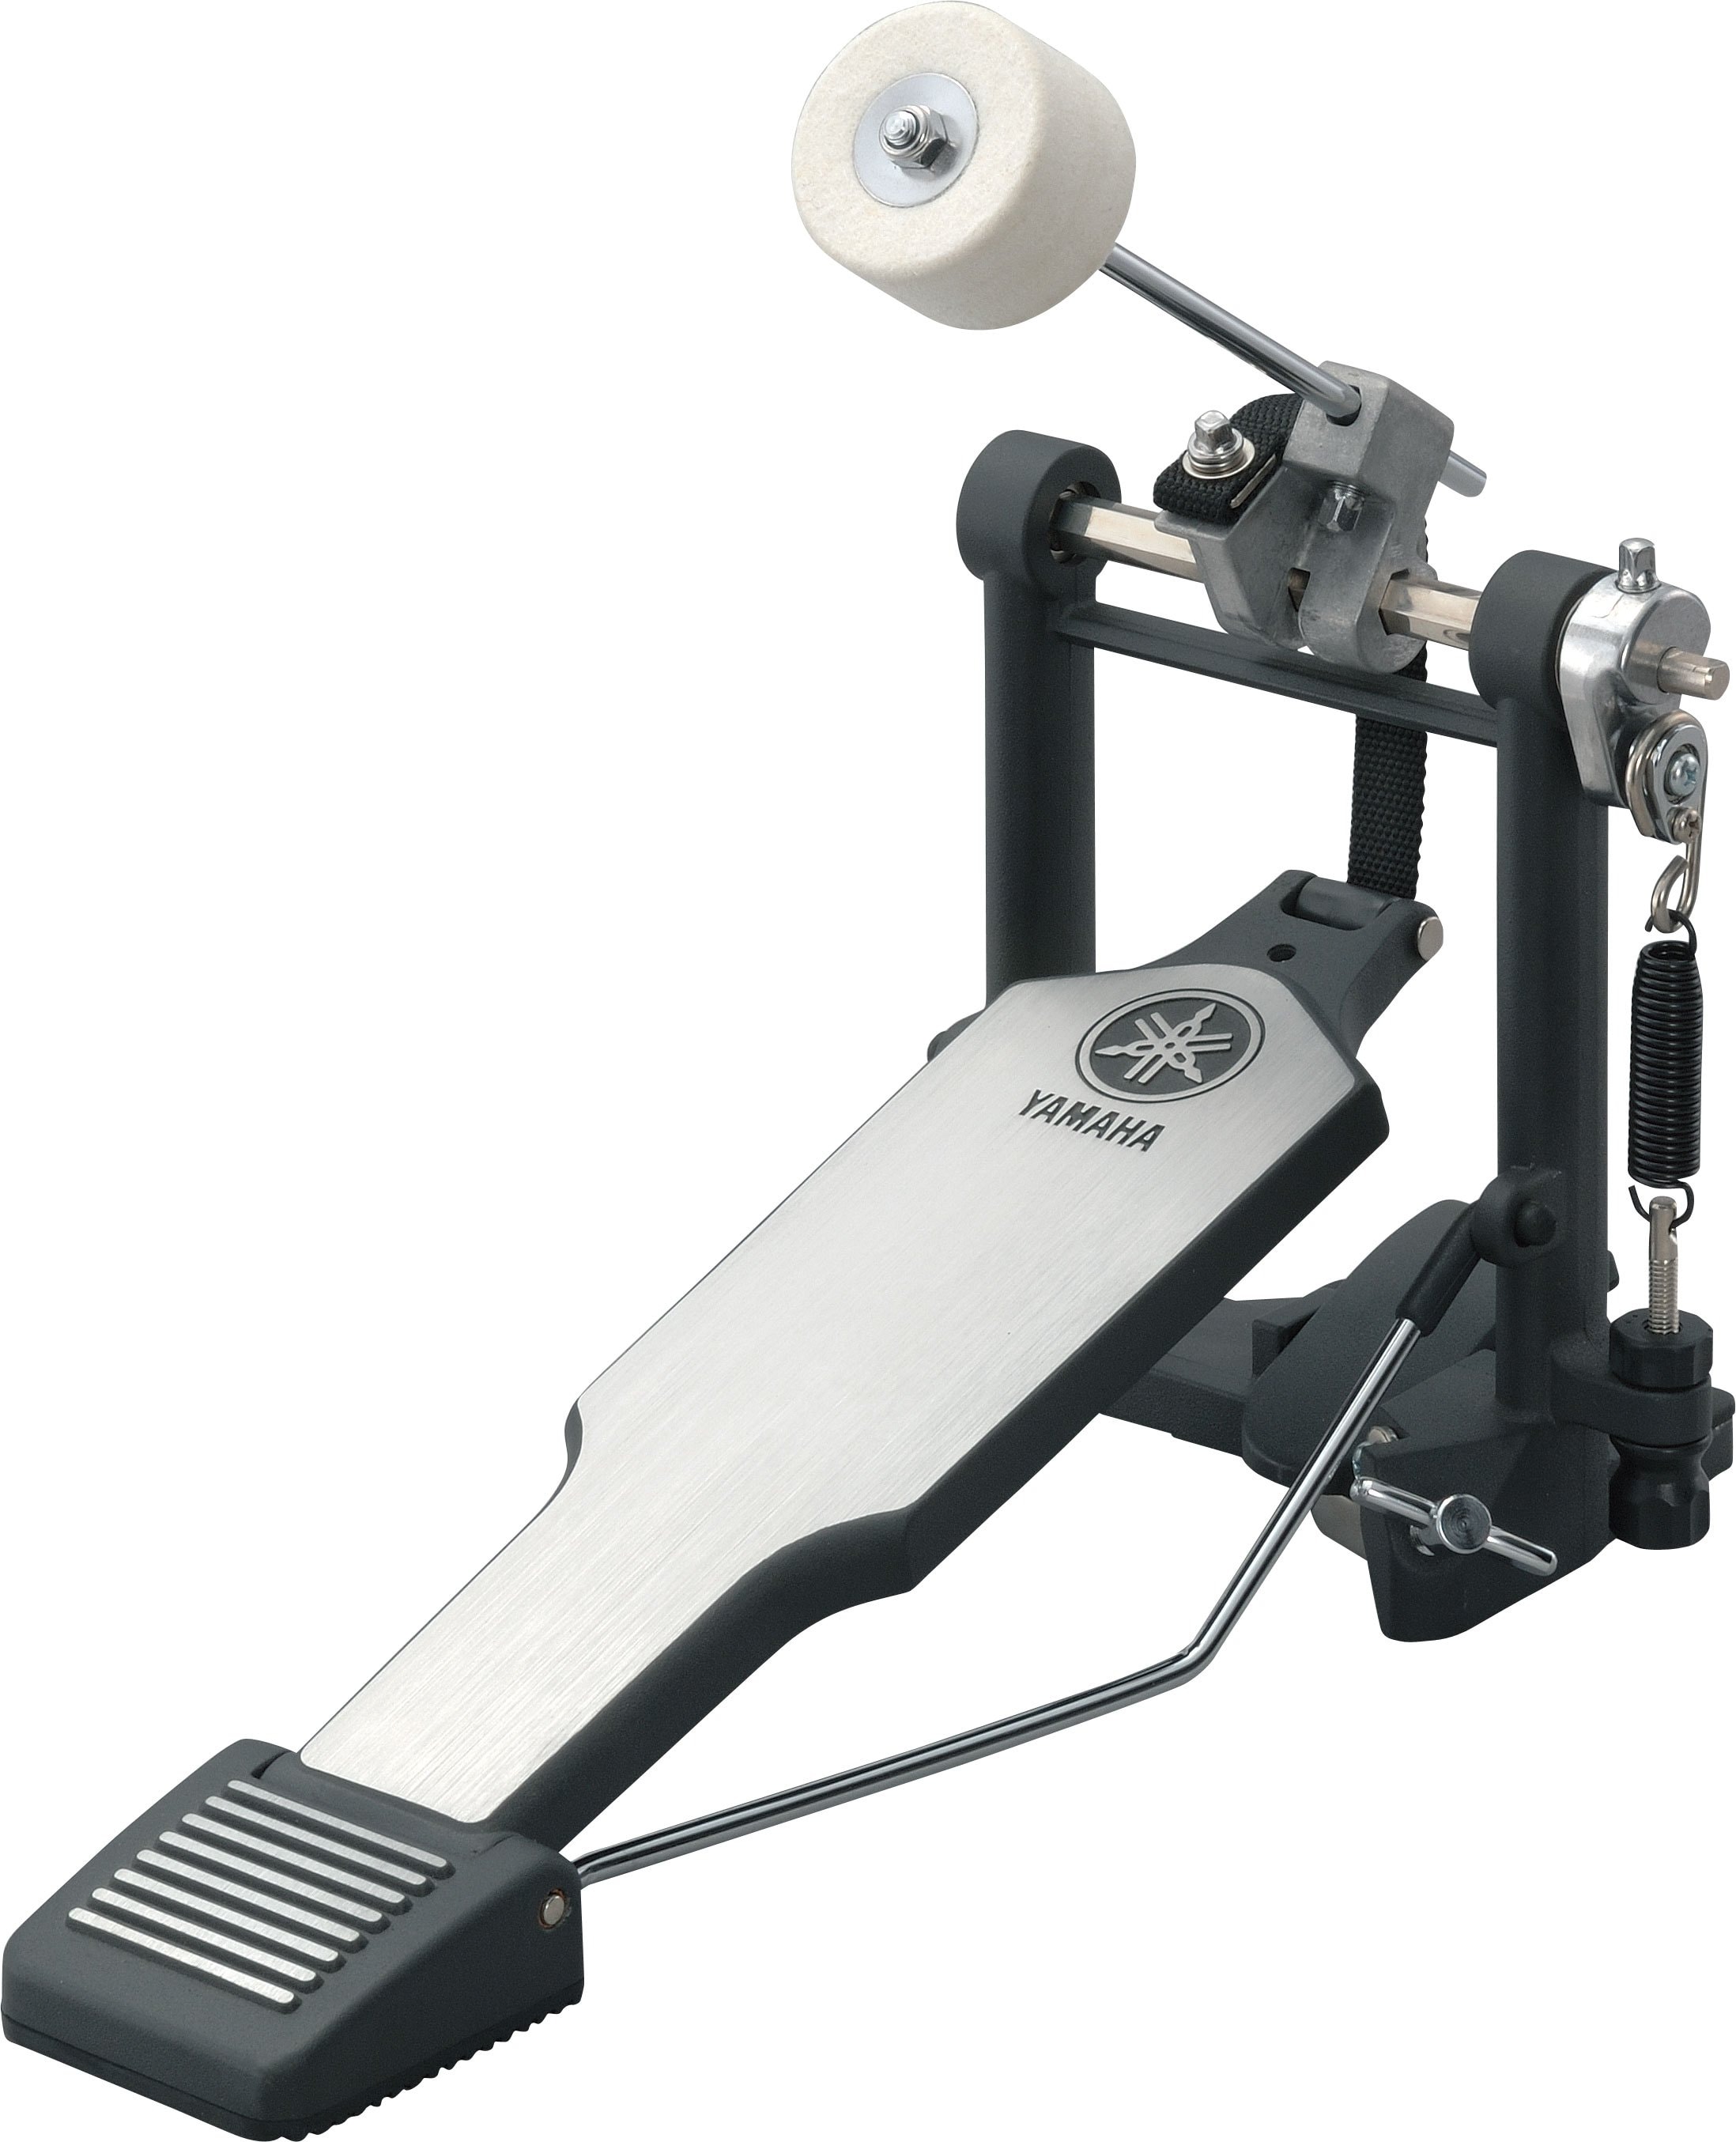 Bass Drum Pedals - Overview - Hardware - Acoustic Drums - Drums